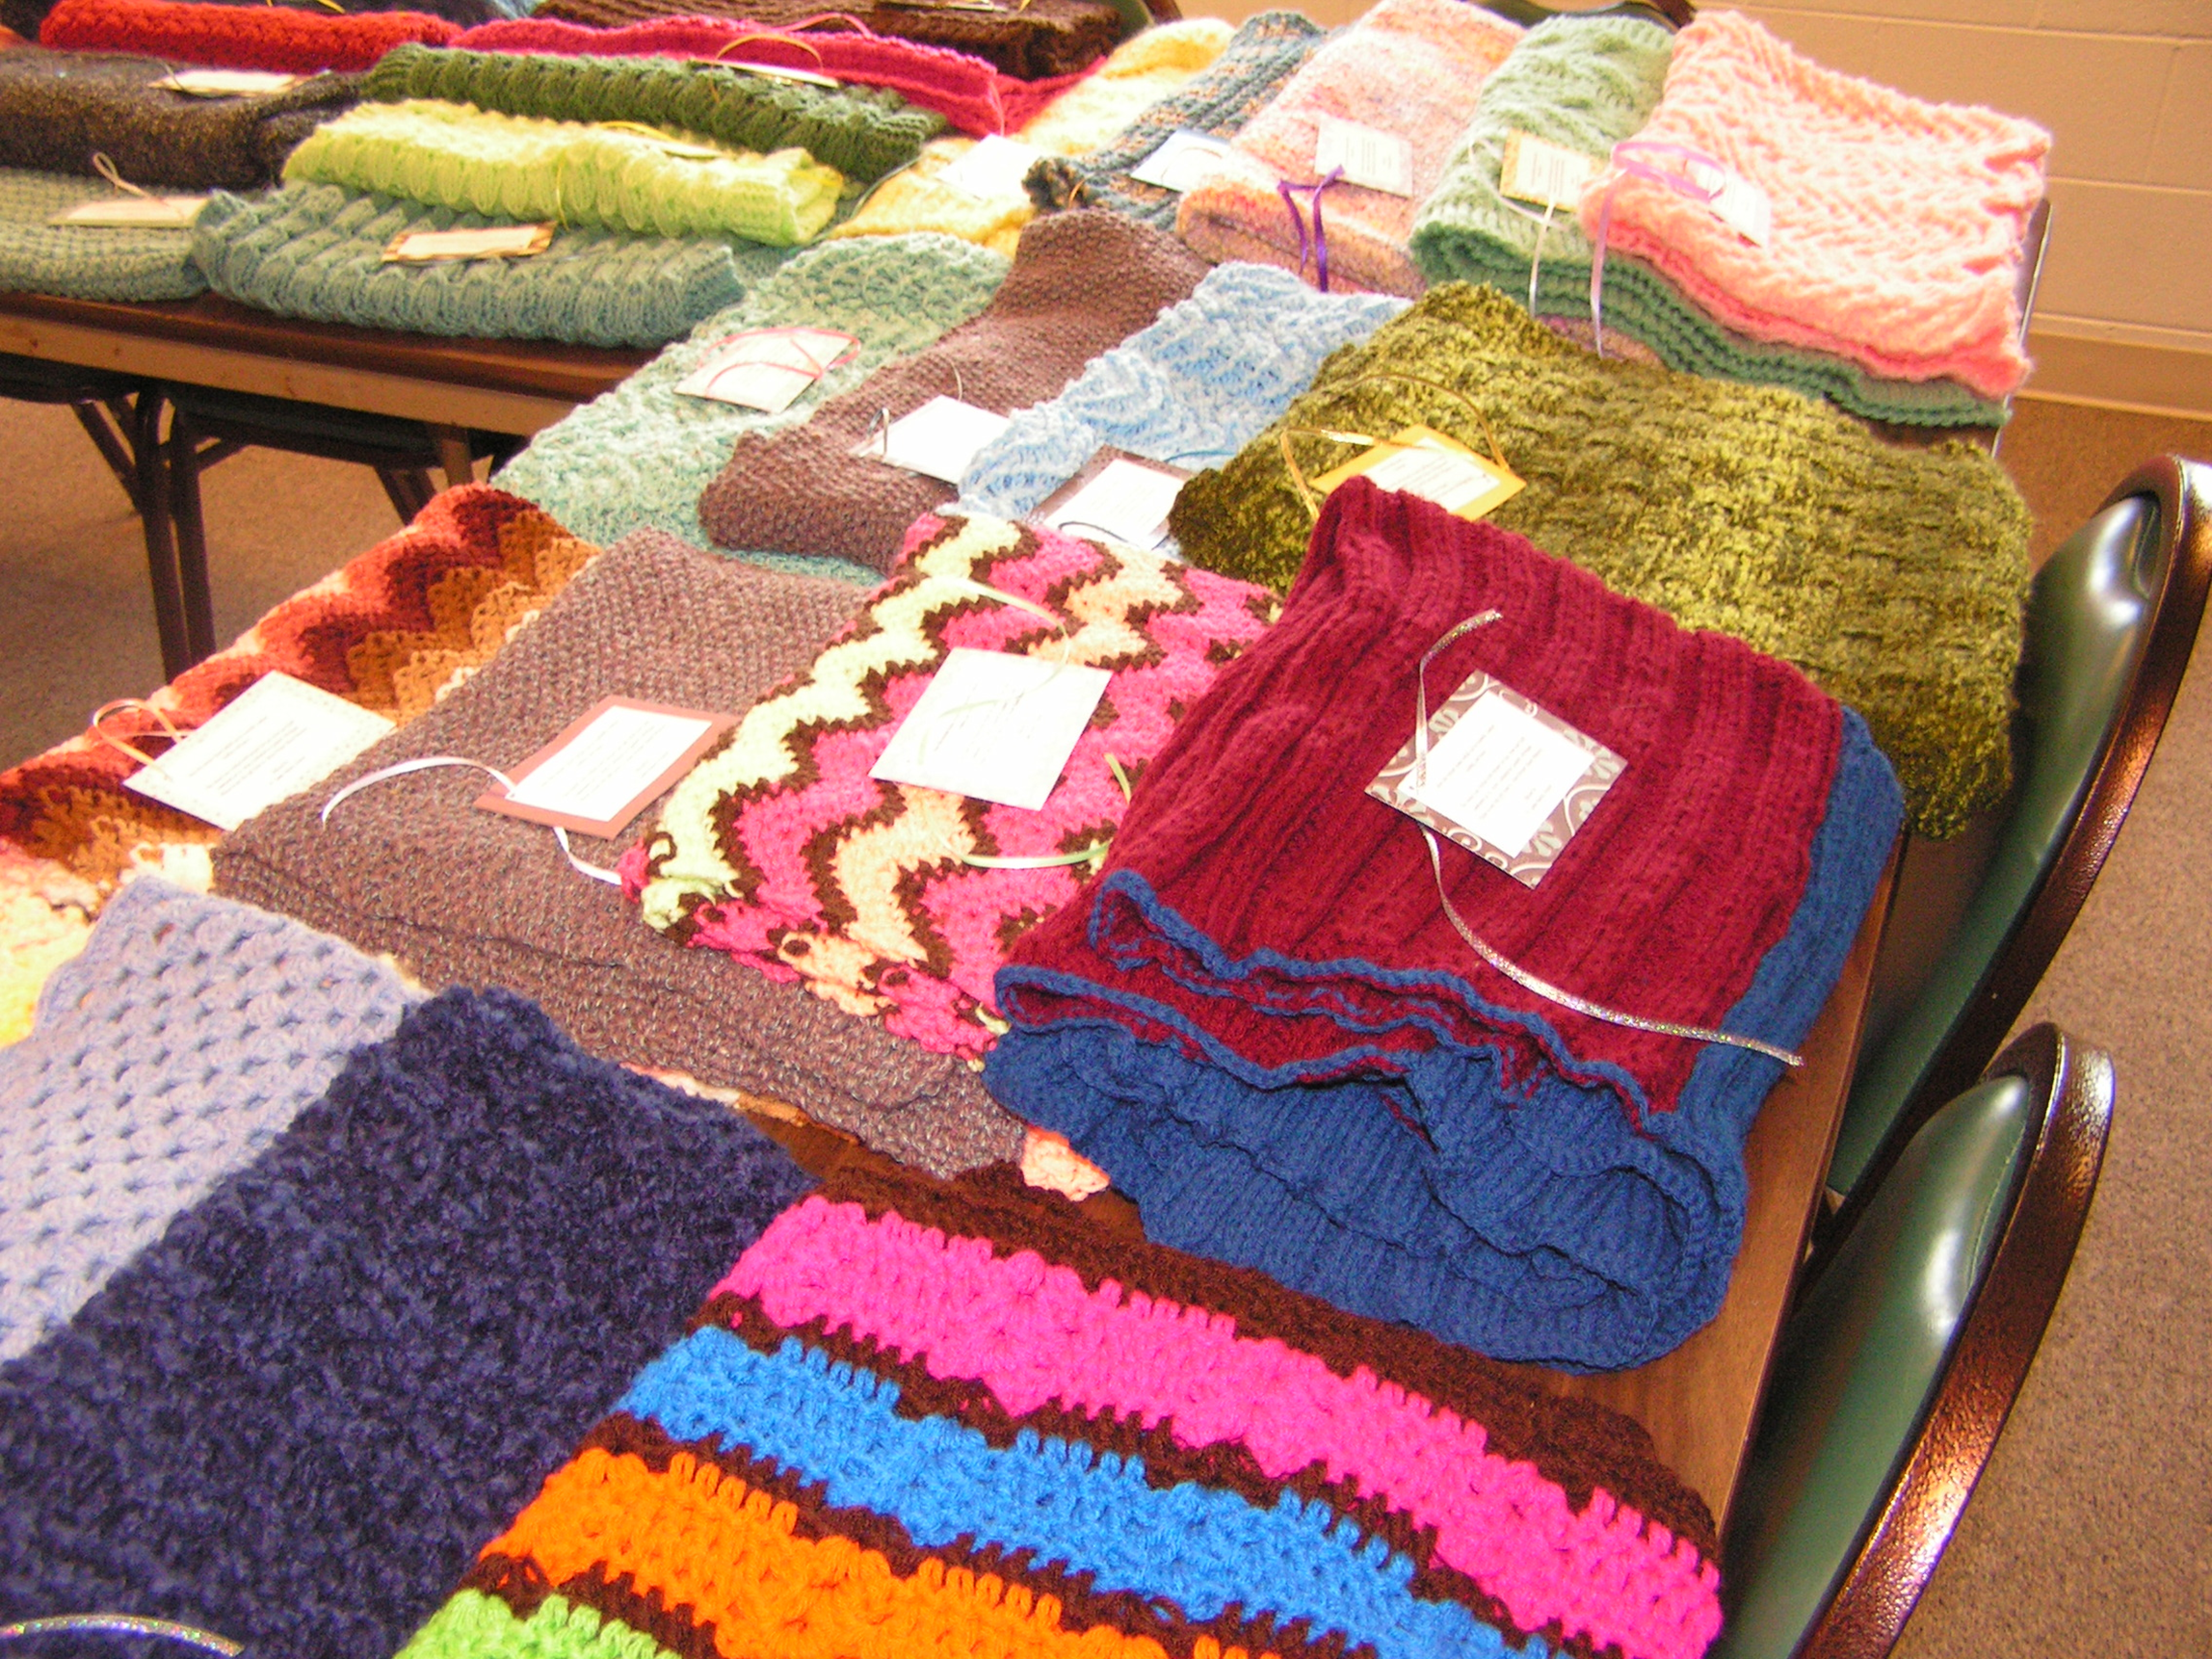     Prayer Shawl Ministry   You Will Be Helping Others Through Prayer And